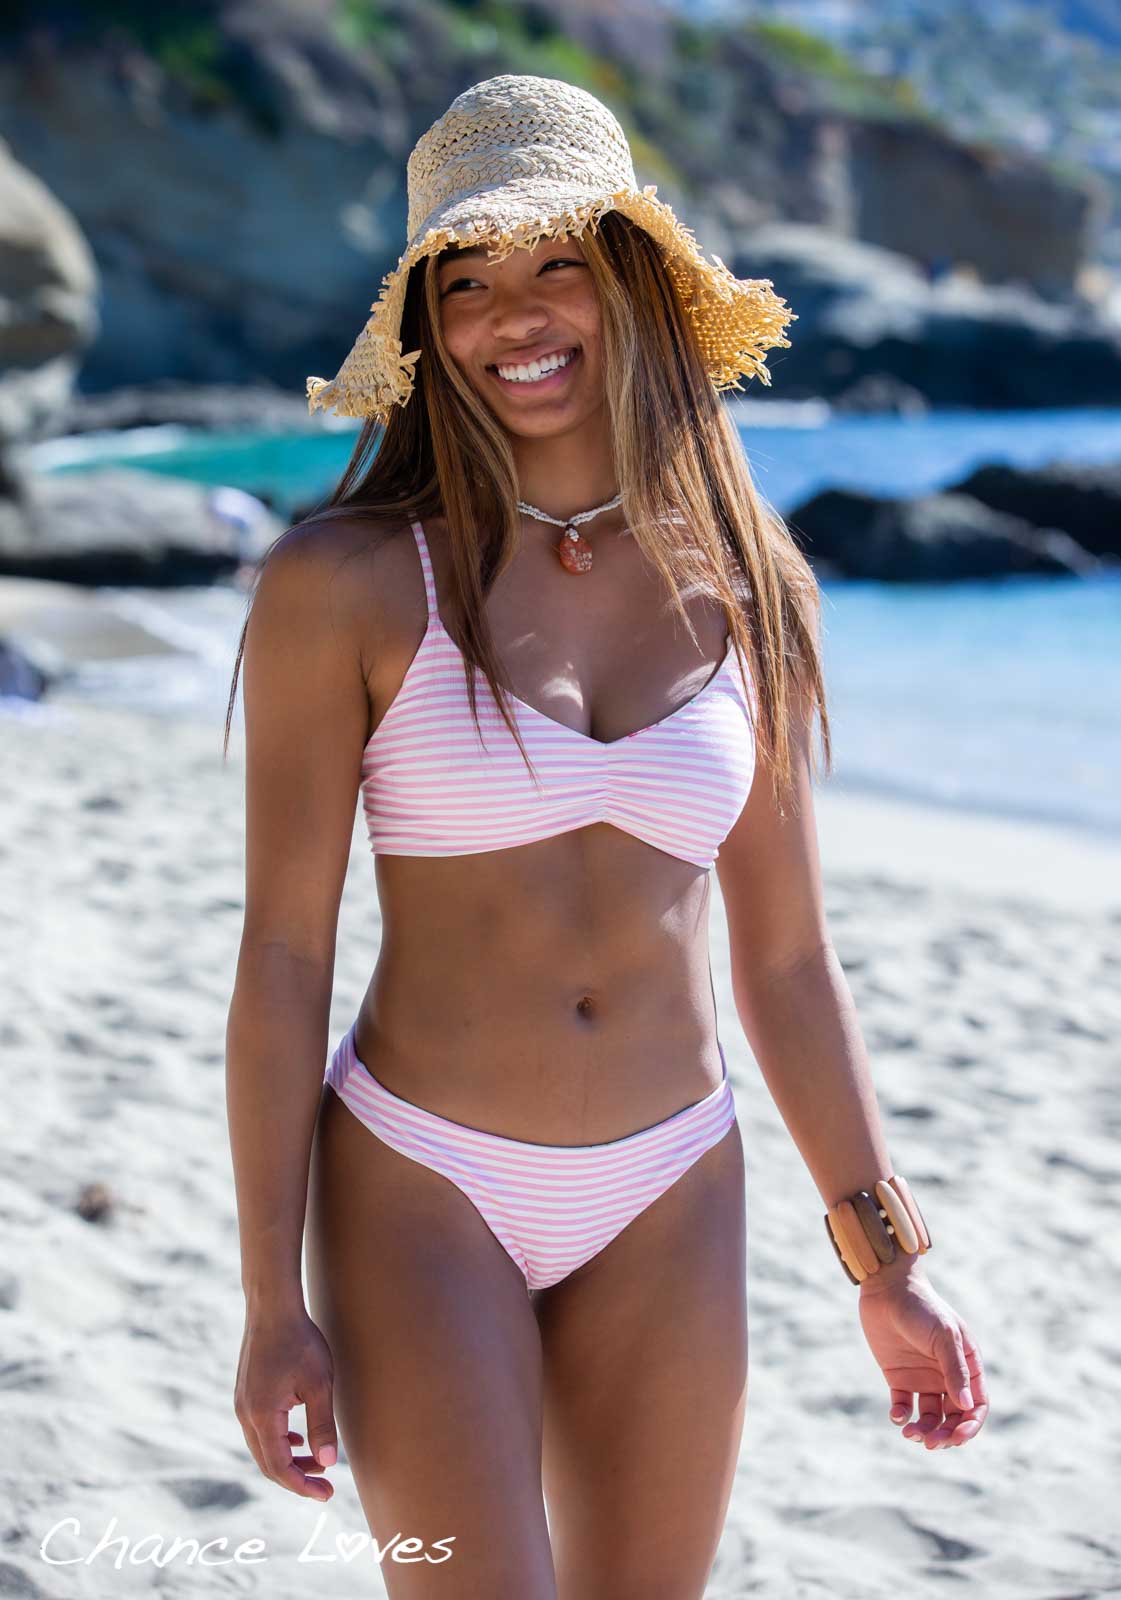 A smiling young woman on the beach wearing a sun hat and an adorable pink white stripe reversible floral bikini